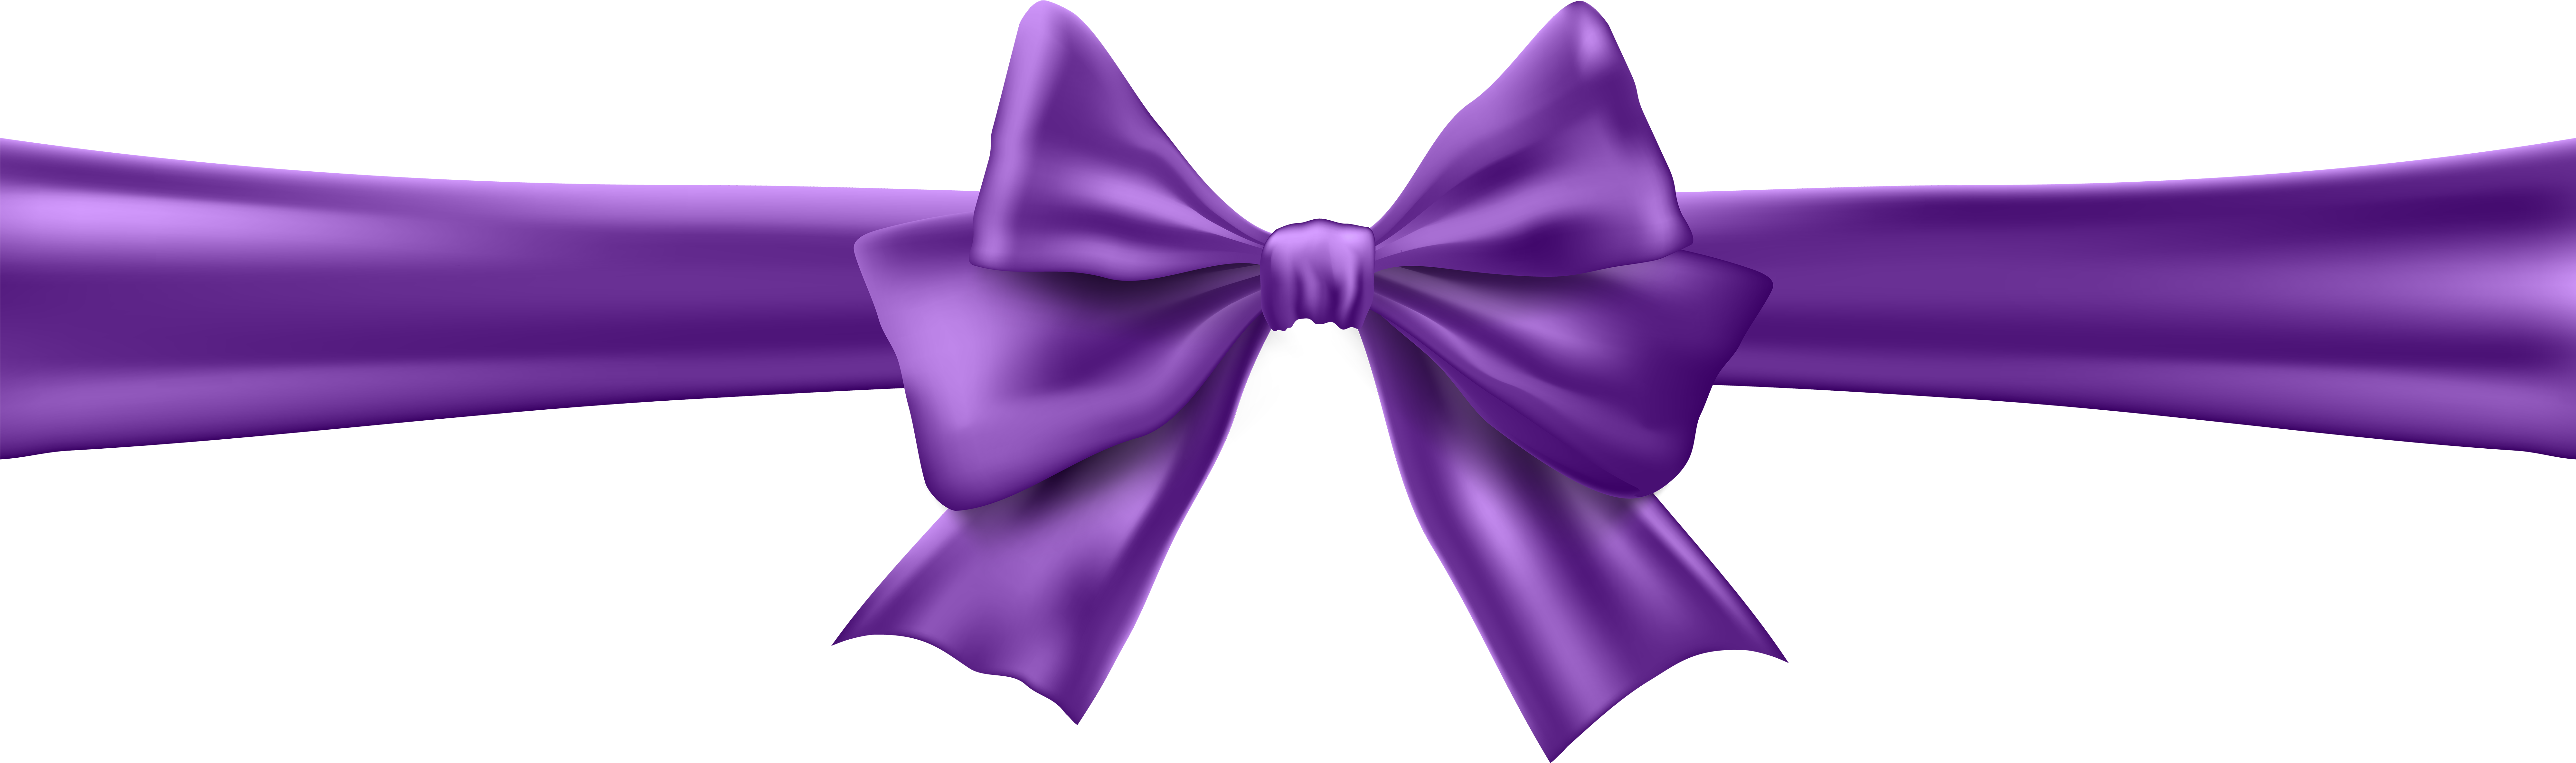 Purple Bow Png Blue Ribbon Bow Png